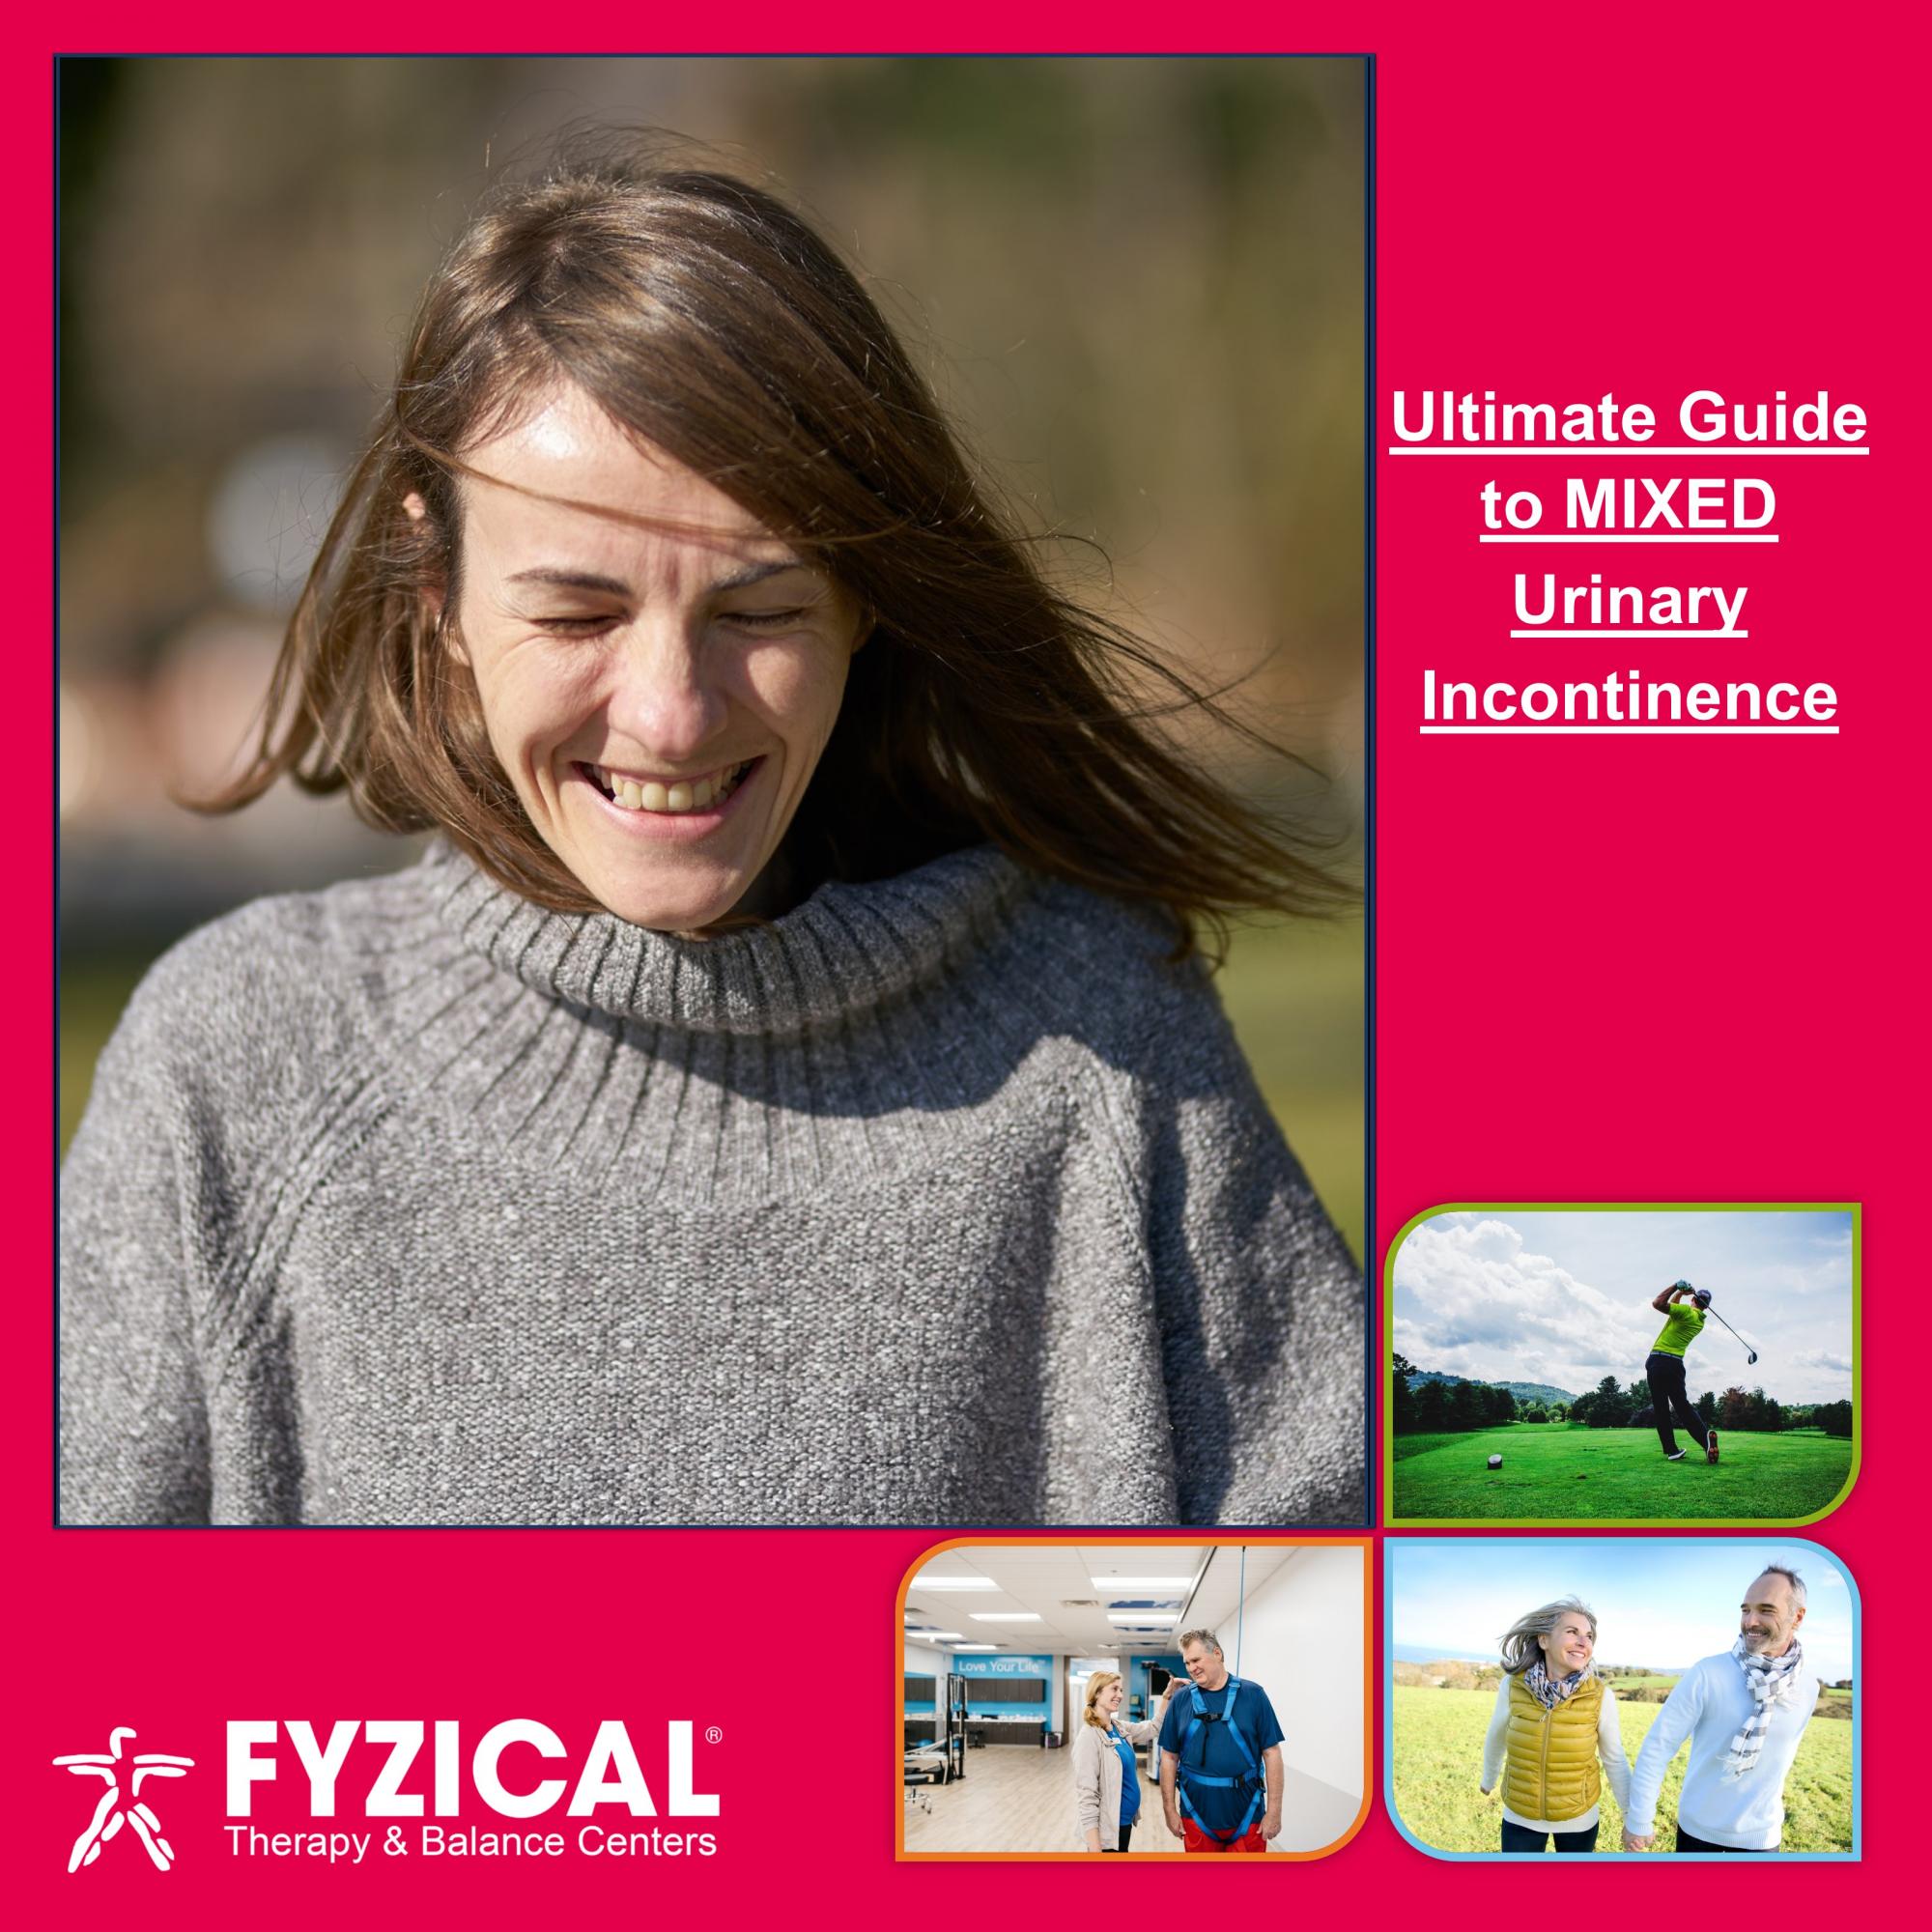 Ultimate Guide to Mixed Urinary Incontinence. What is Mixed Incontinence? What makes mixed incontinence worse? How do you treat mixed incontinence?